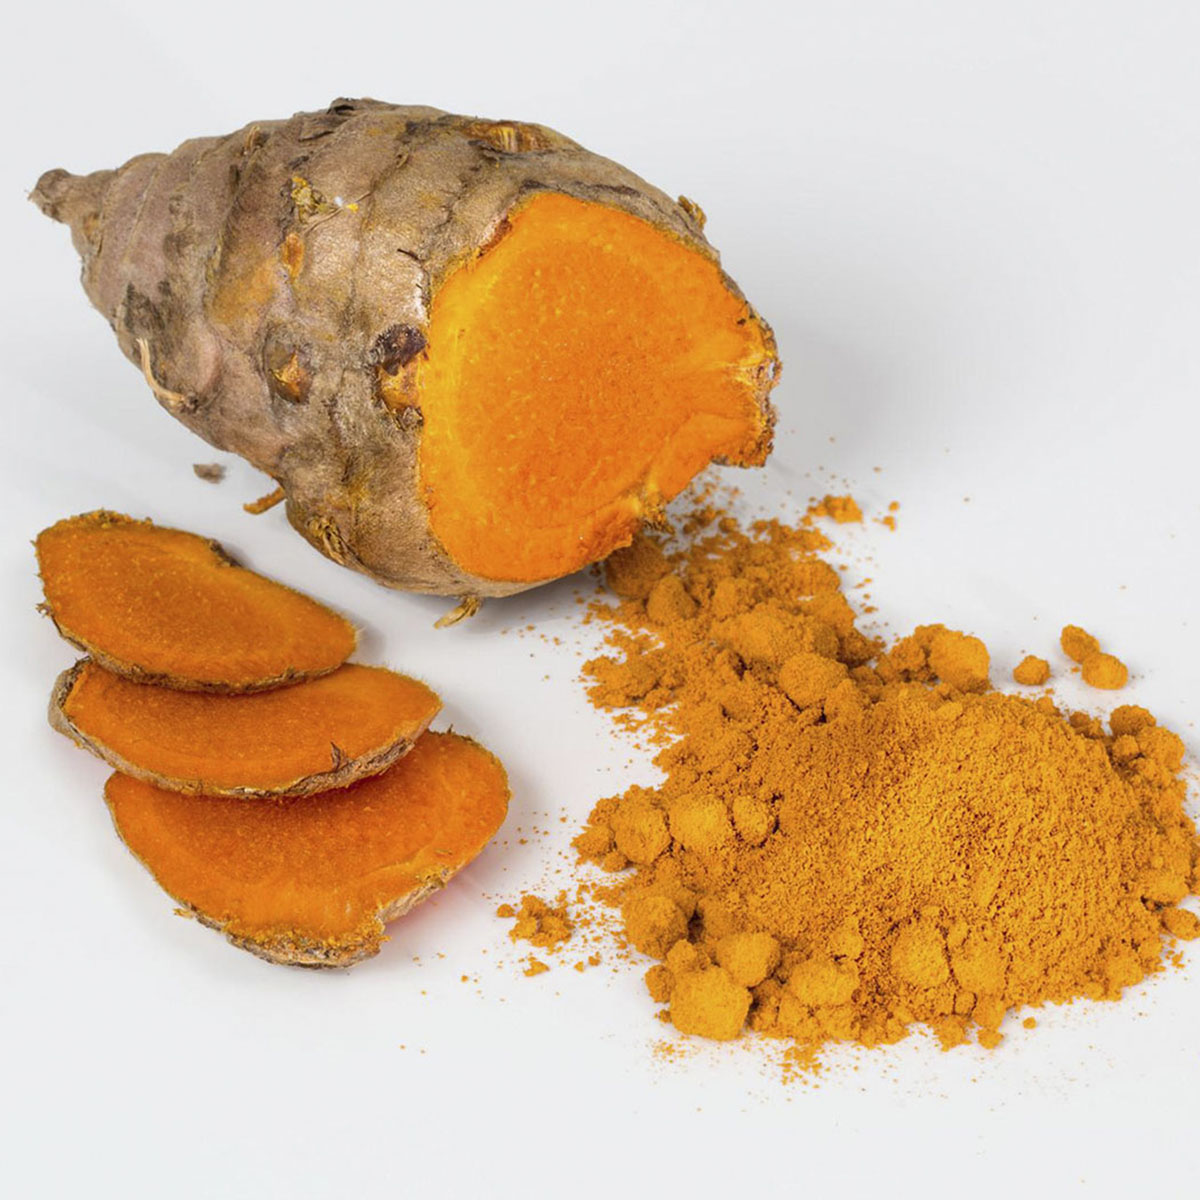 bright orange whole, sliced, and ground turmeric root